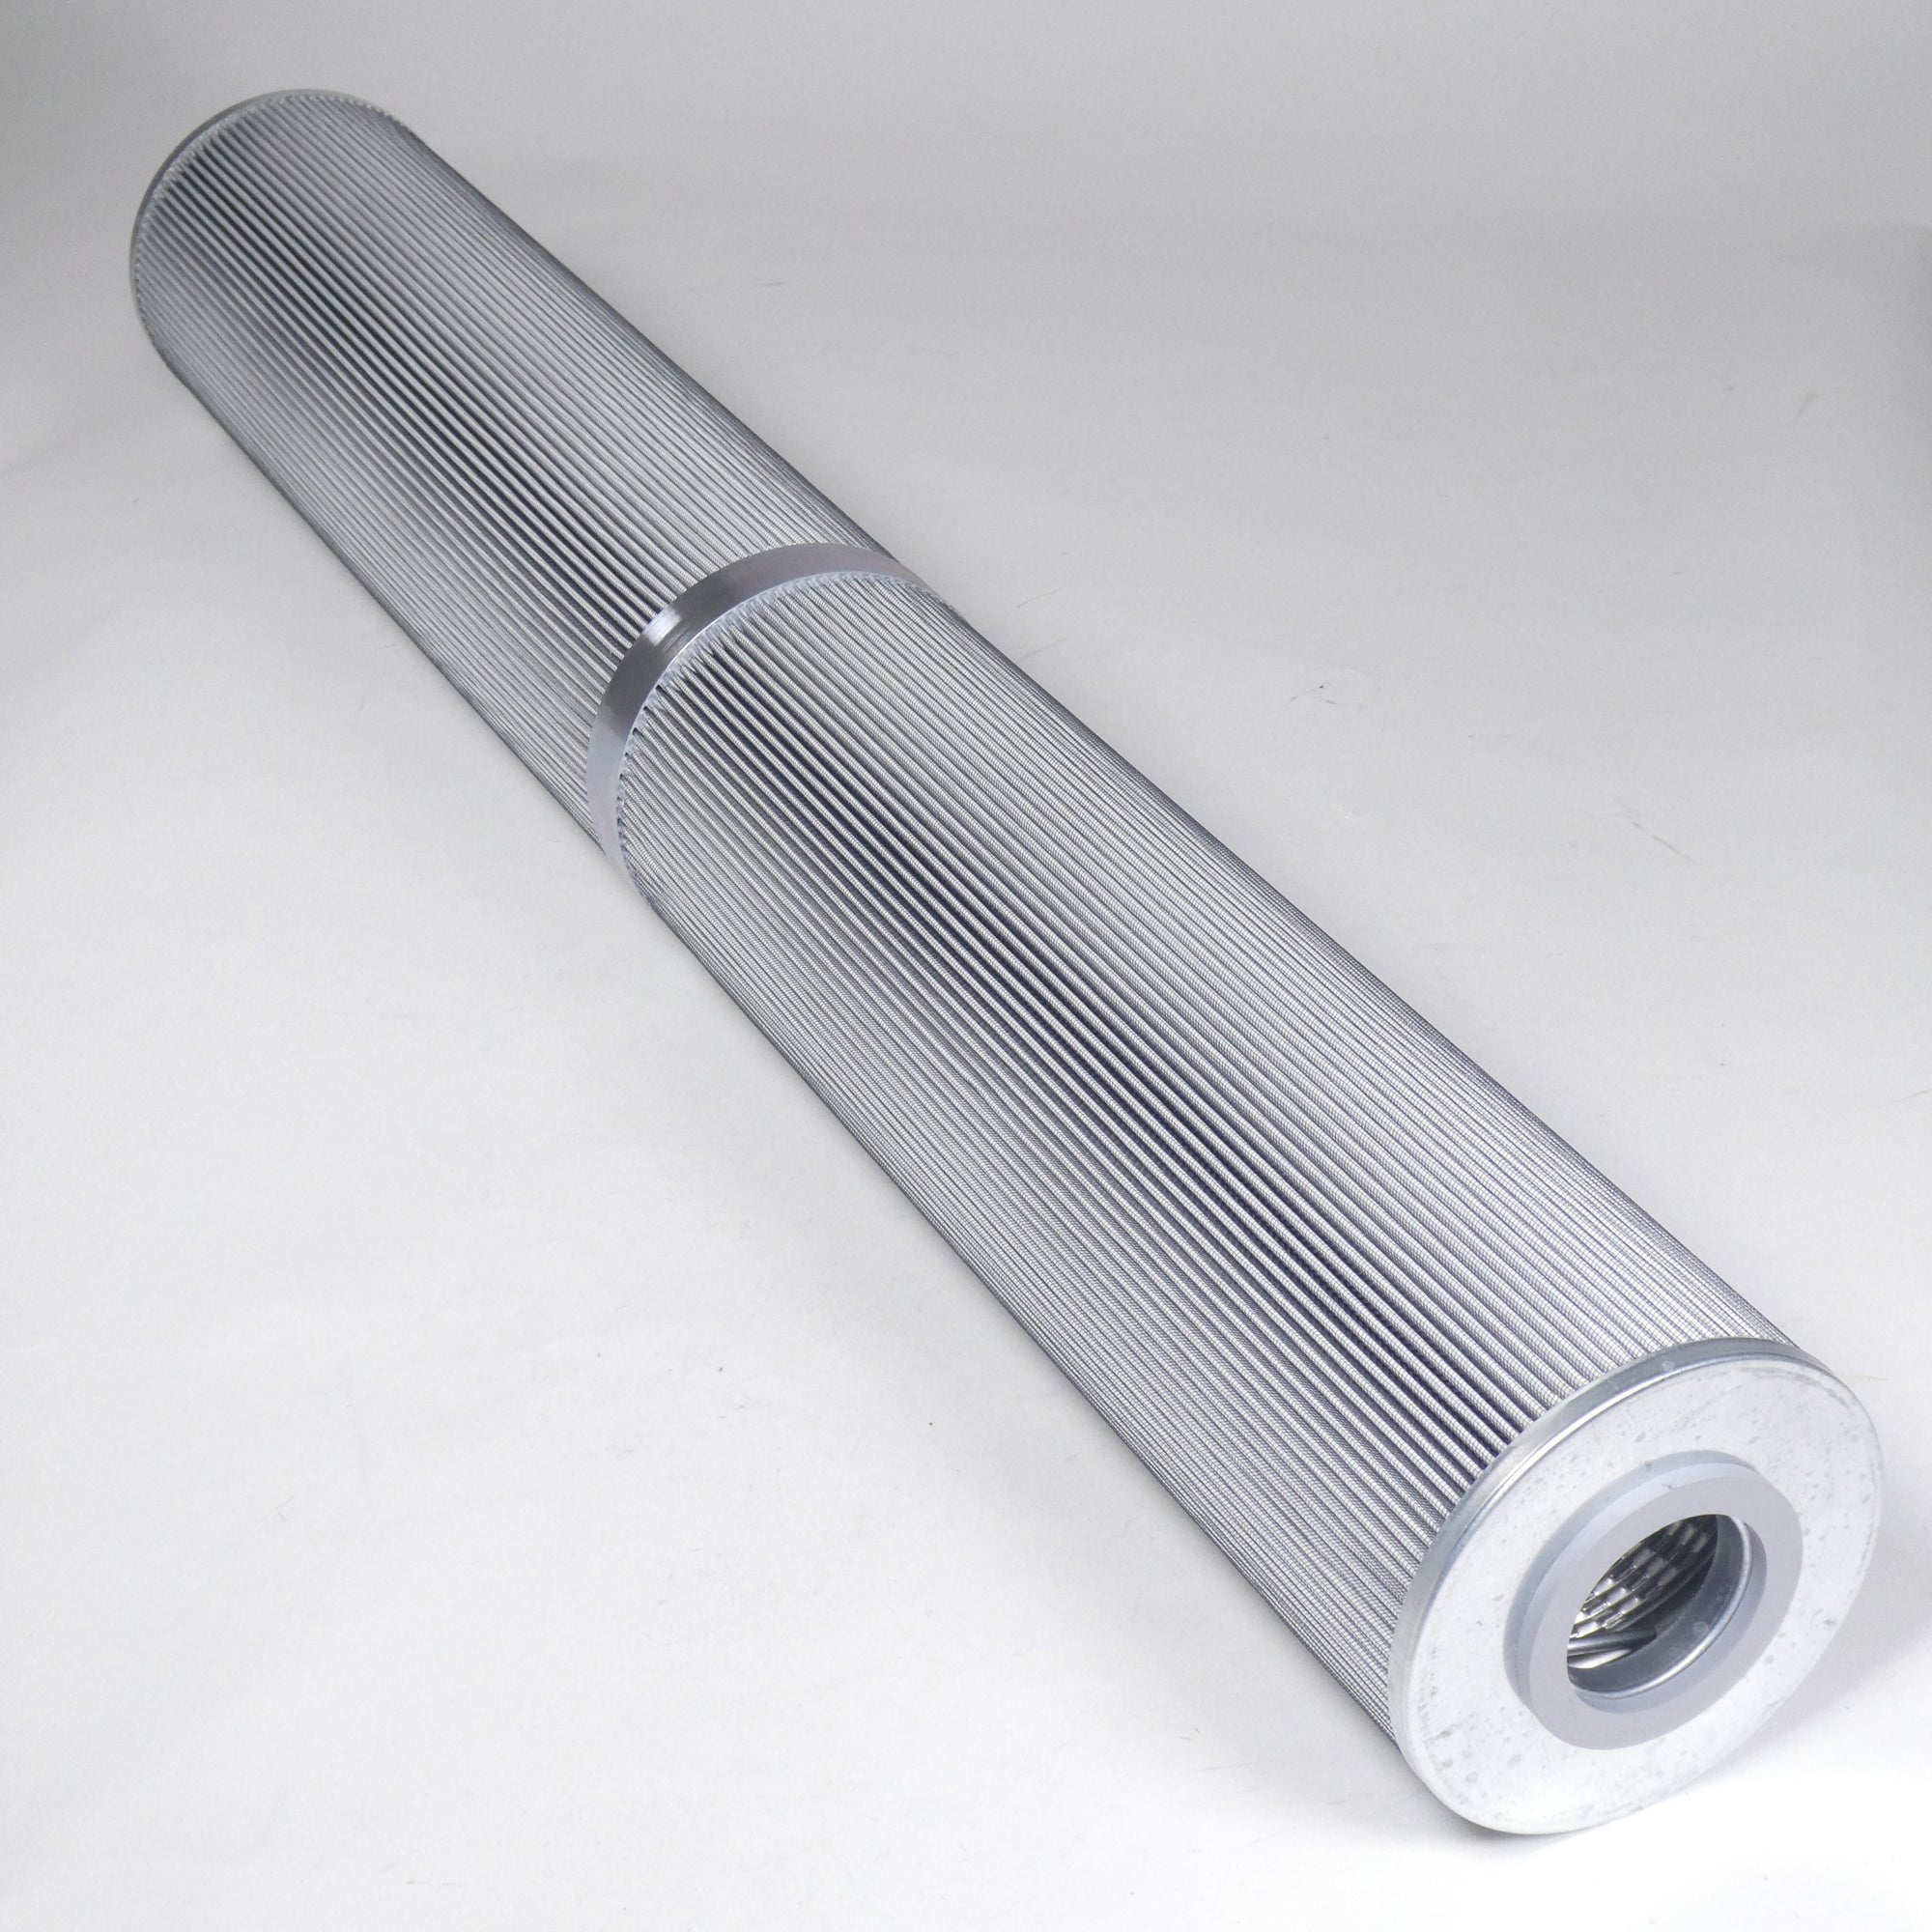 Hydrafil Replacement Filter Element for CC Jensen PA5600505